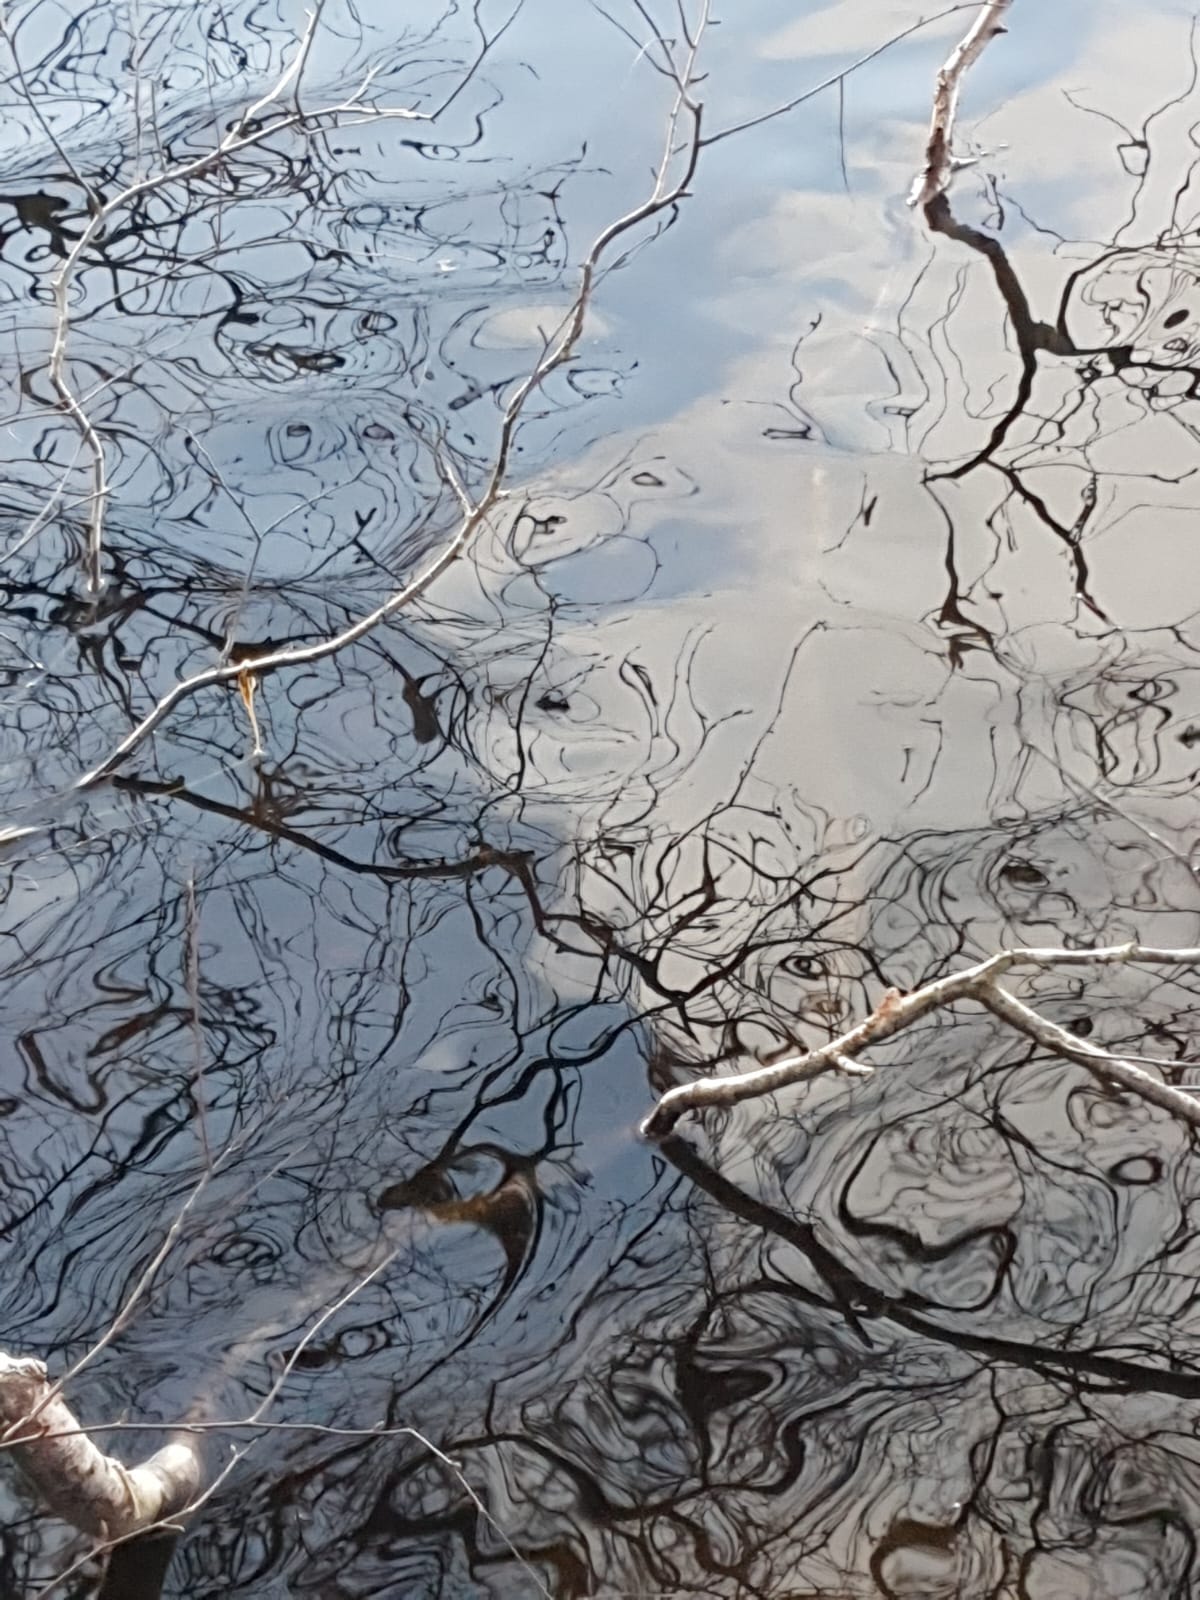 the rippling surface of Loch Laide